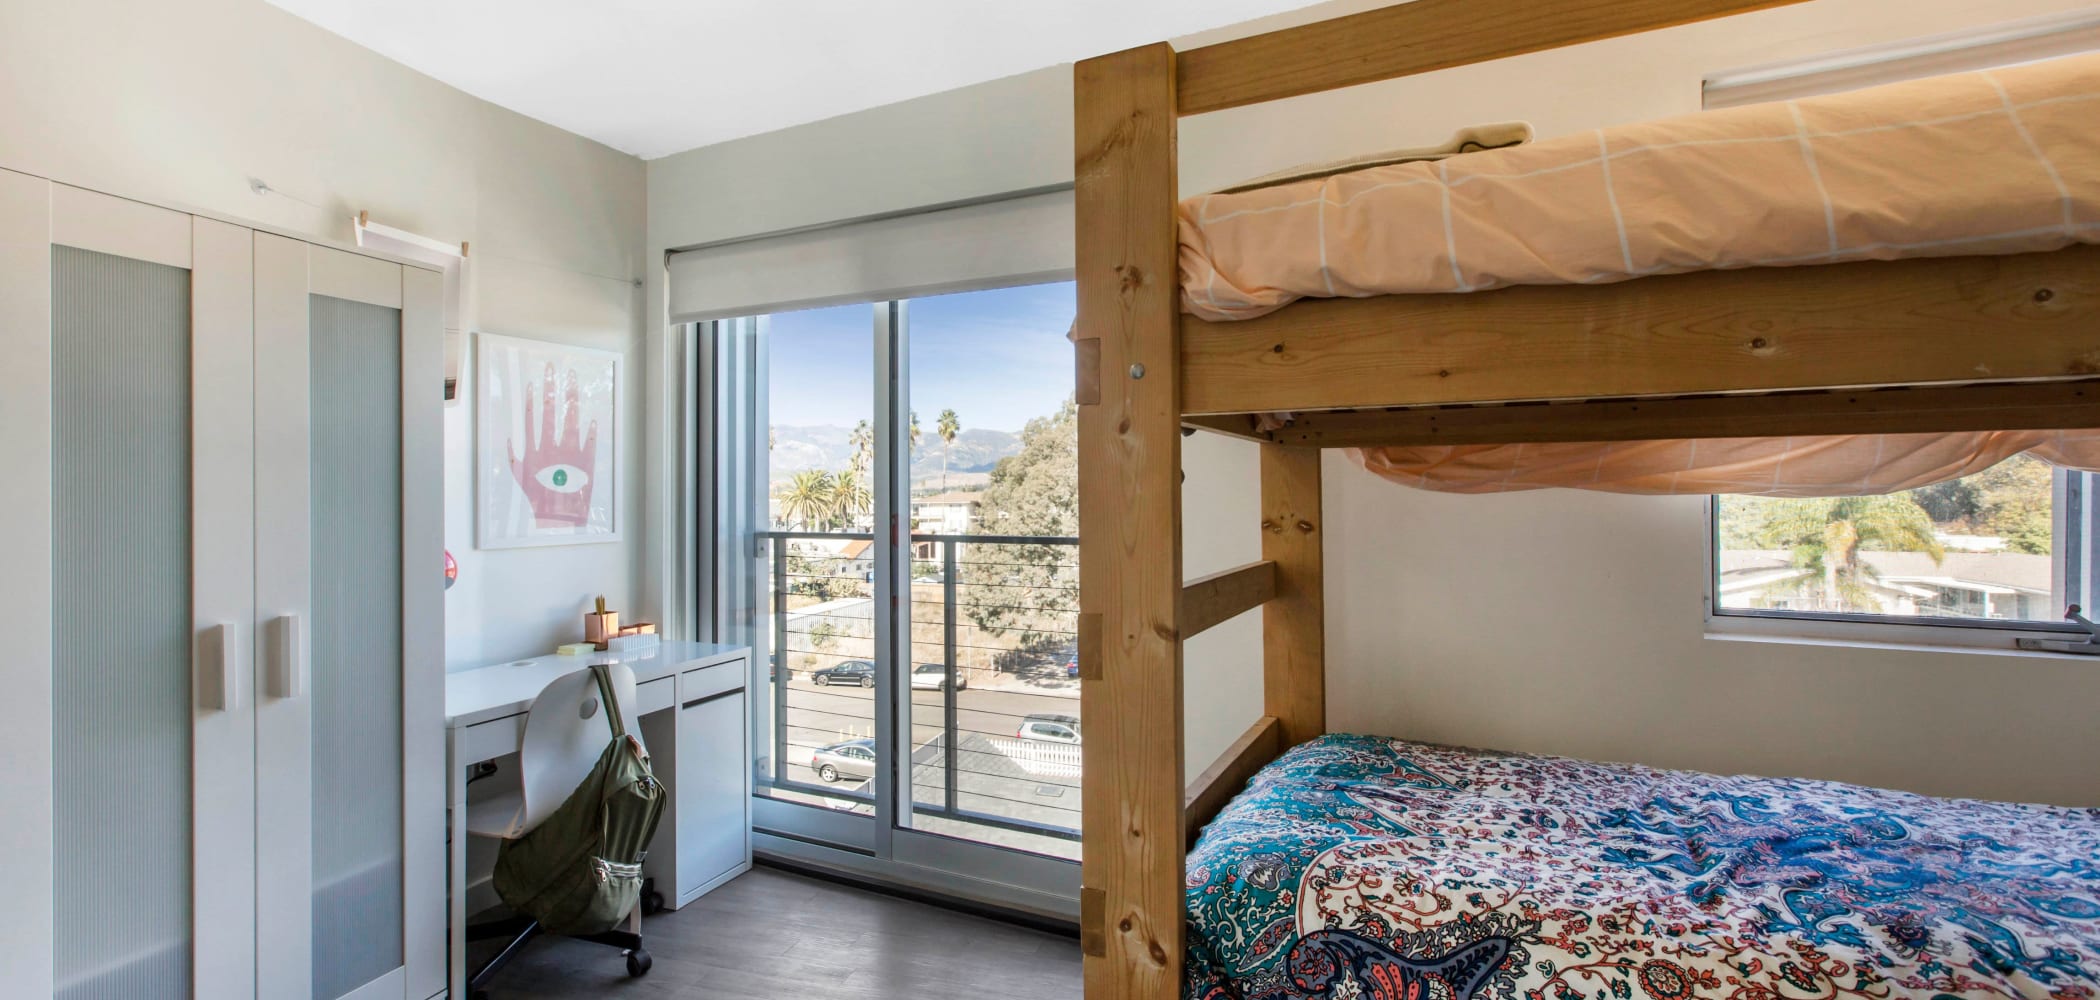 Bedroom with bunk beds at ICON in Isla Vista, California